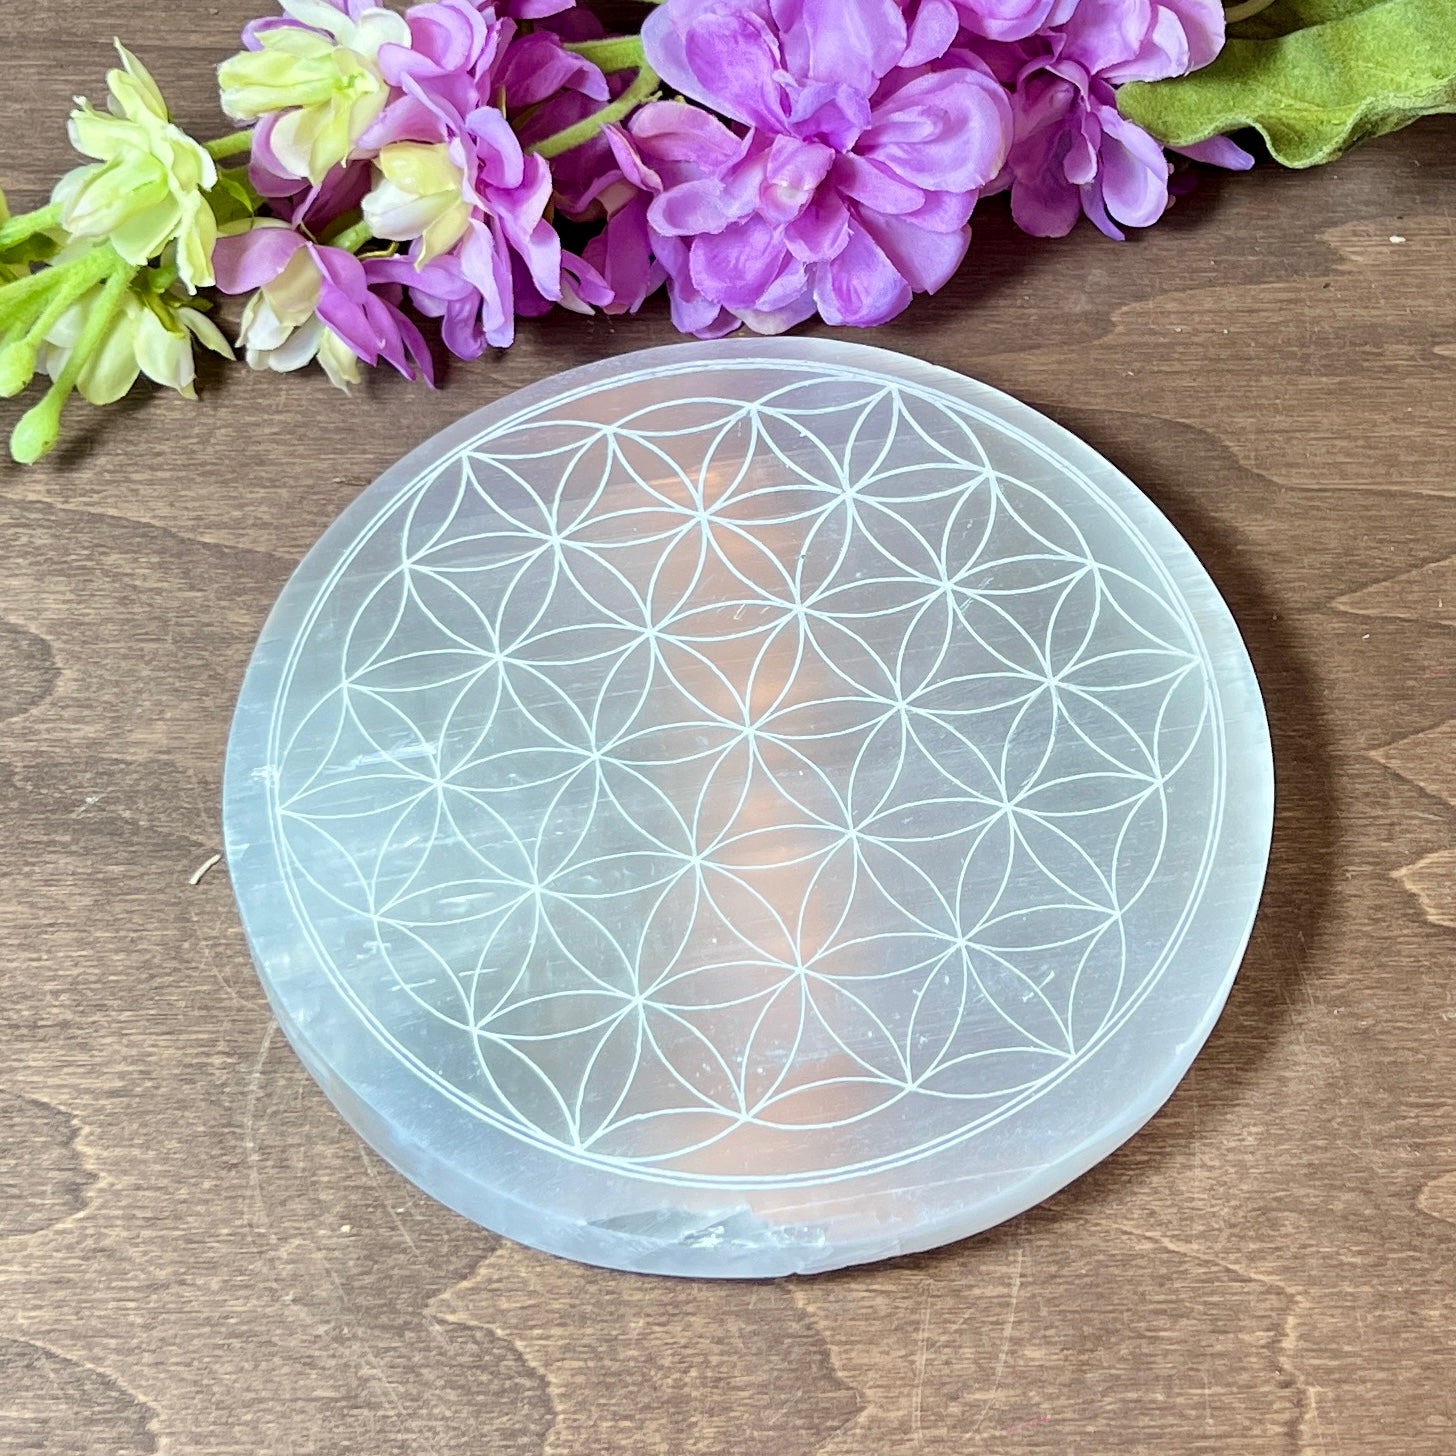 Selenite Cleansing Platform with Flower of Life Carving